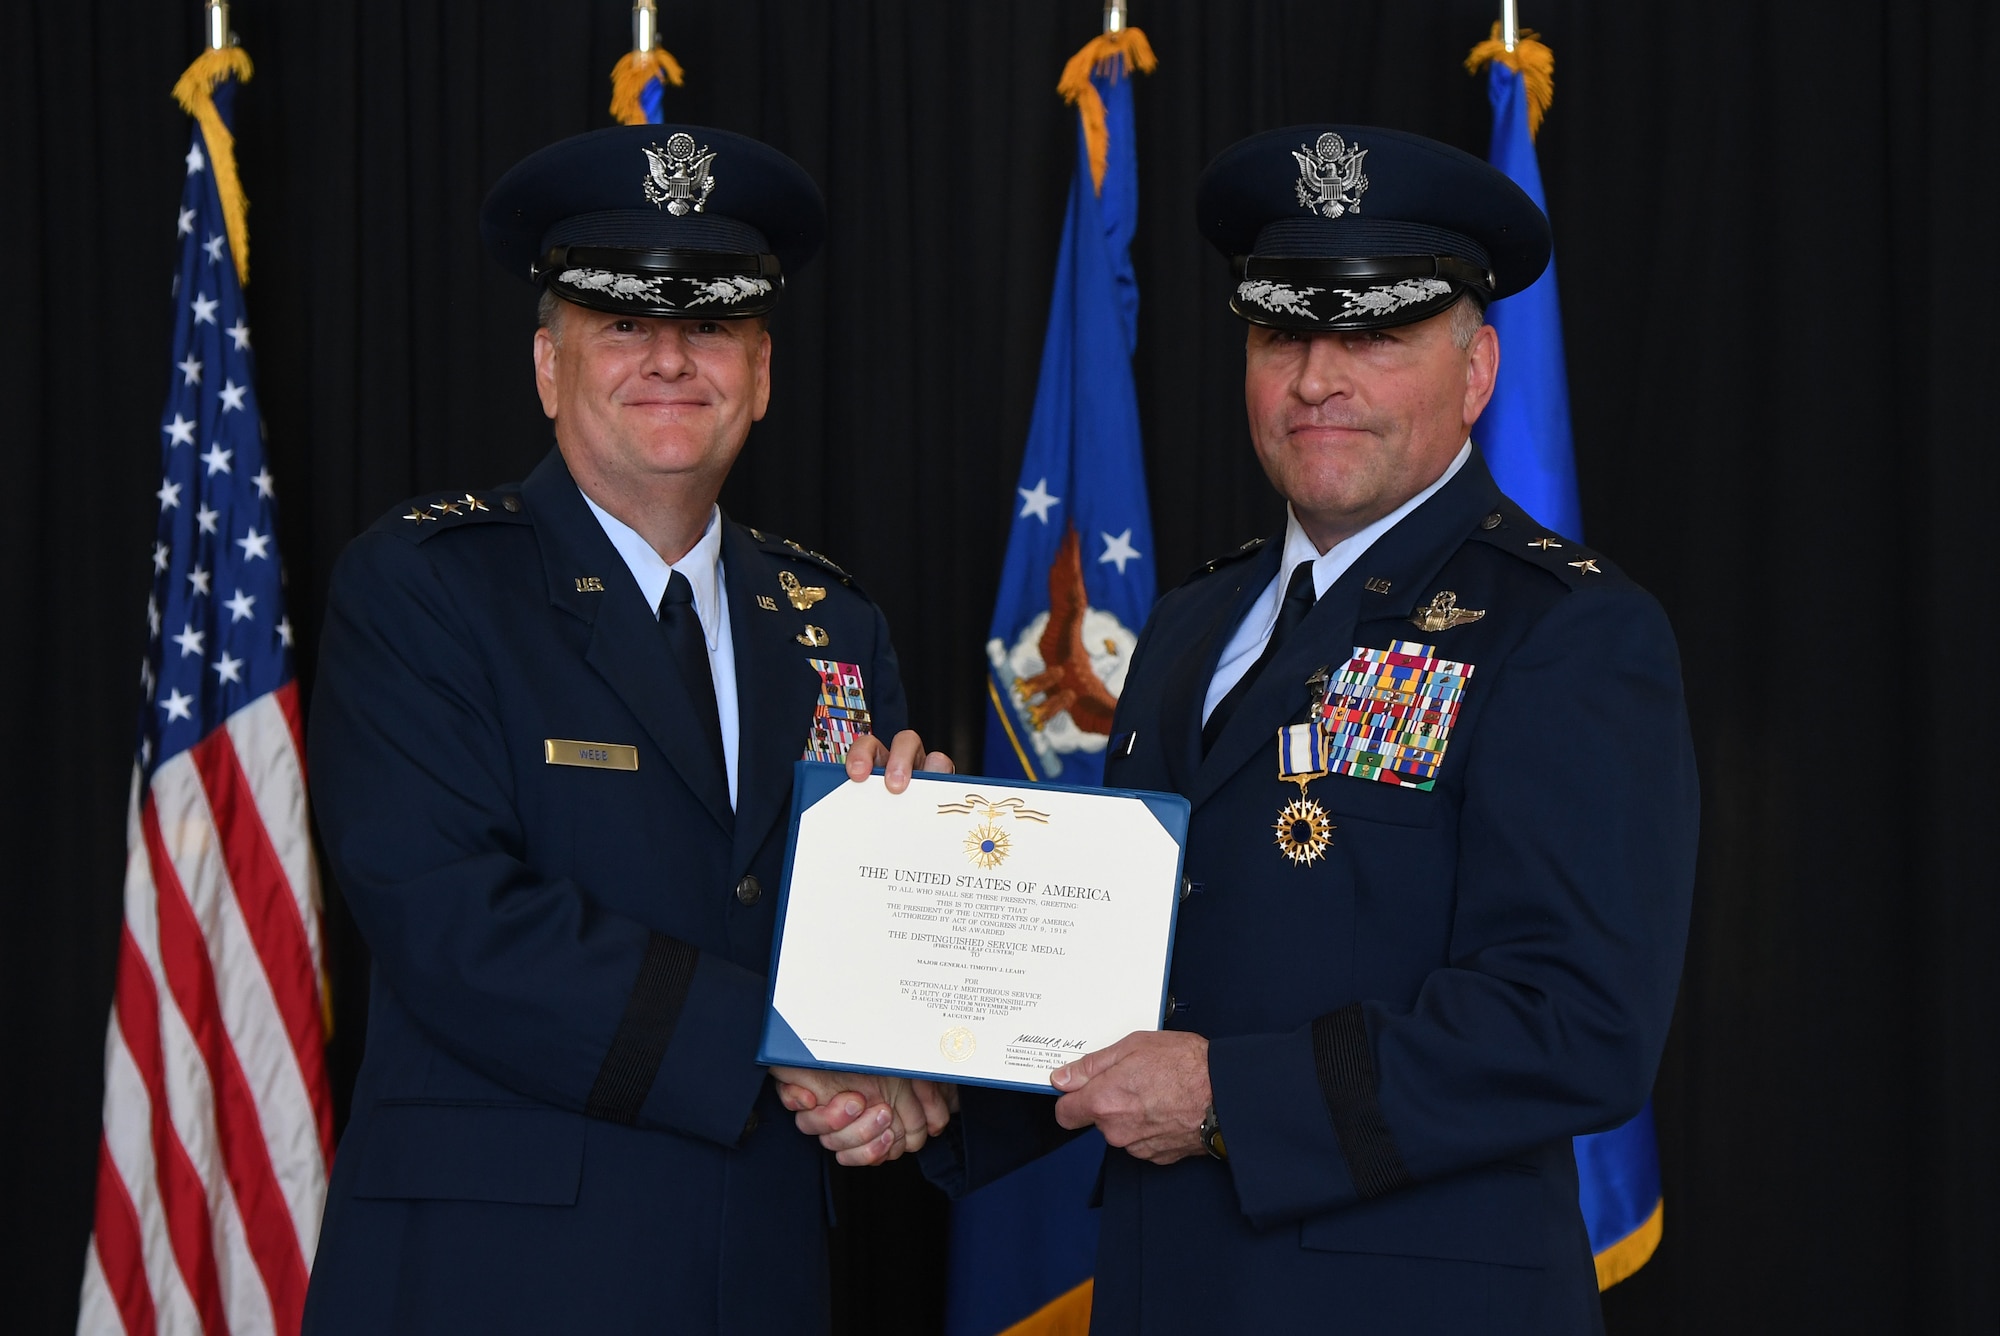 U.S. Air Force Lt. Gen. Brad Webb, commander of Air Education and Training Command, presents the Distinguished Service Medal certificate to Maj. Gen. Timothy Leahy, Second Air Force commander, during the Second Air Force change of command ceremony on Keesler Air Force Base, Mississippi, Aug. 29, 2019. The ceremony is a symbol of command being exchanged from one commander to the next. Leahy relinquished command of the Second Air Force to Maj. Gen. Andrea Tullos. (U.S. Air Force photo by Kemberly Groue)